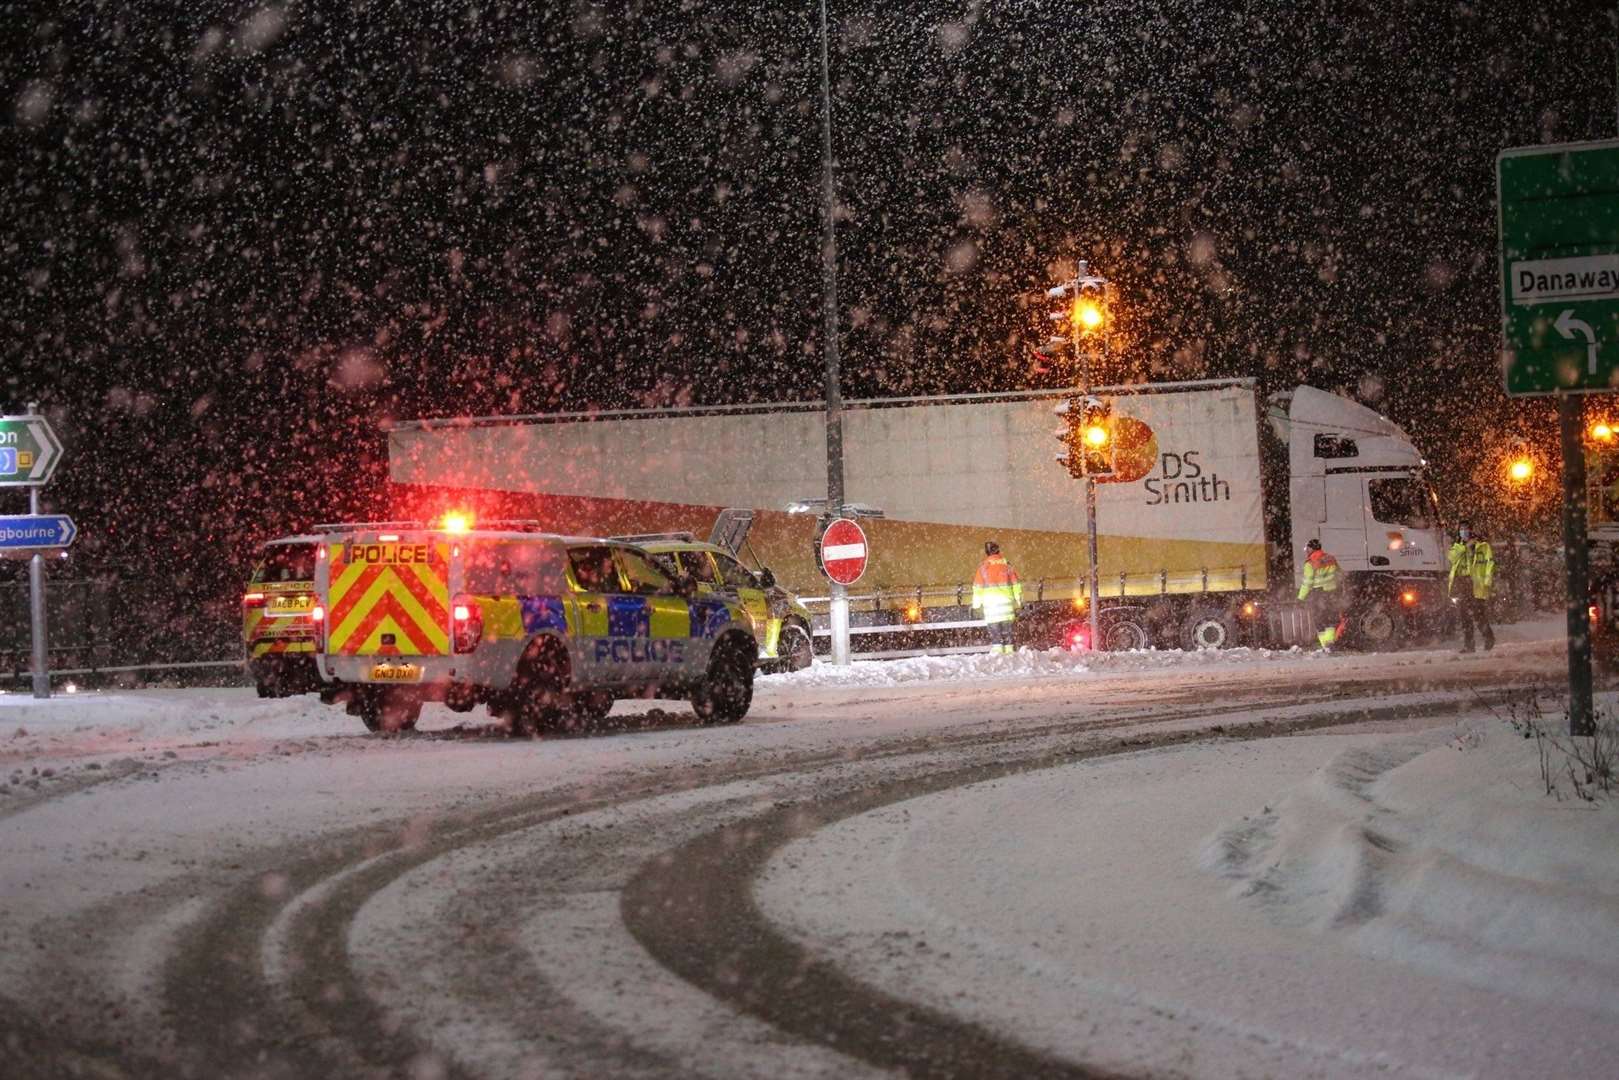 Conditions were treacherous along the A249 last night. Picture: UKNIP